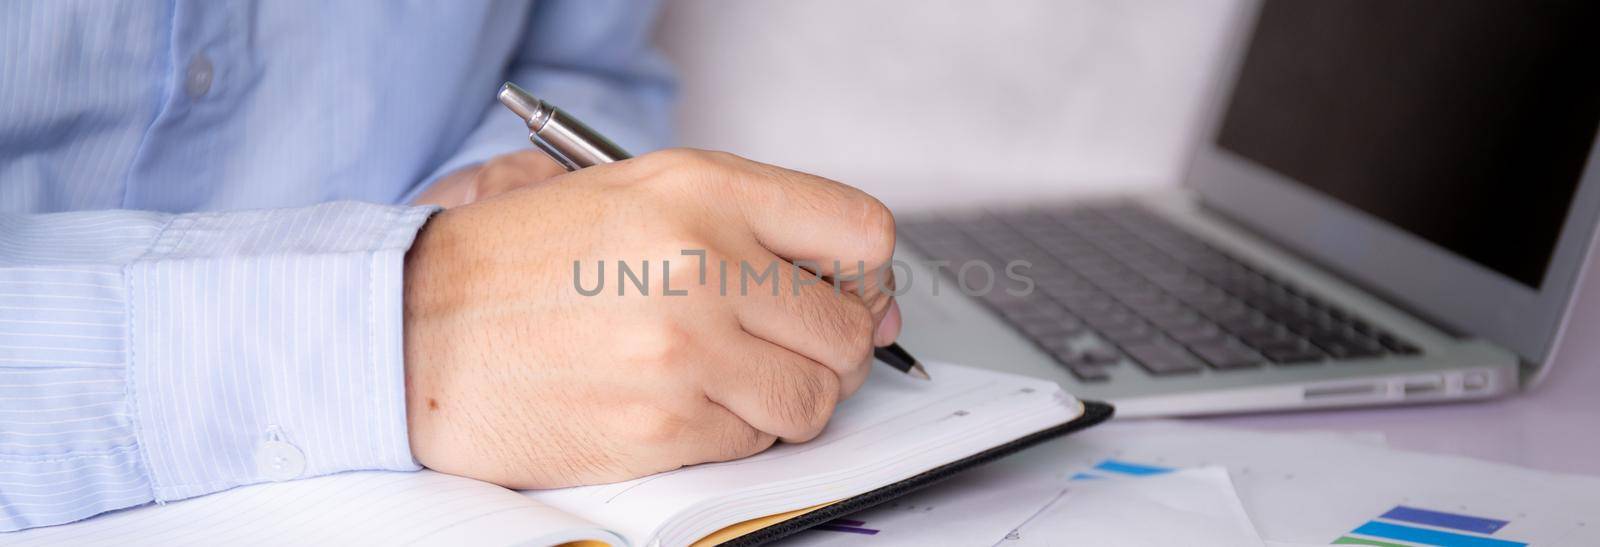 Hands of businessman calculate tax with calculator while laptop computer on desk, man planning finance and investment with graph and chart, statistic and examining account, business concept. by nnudoo